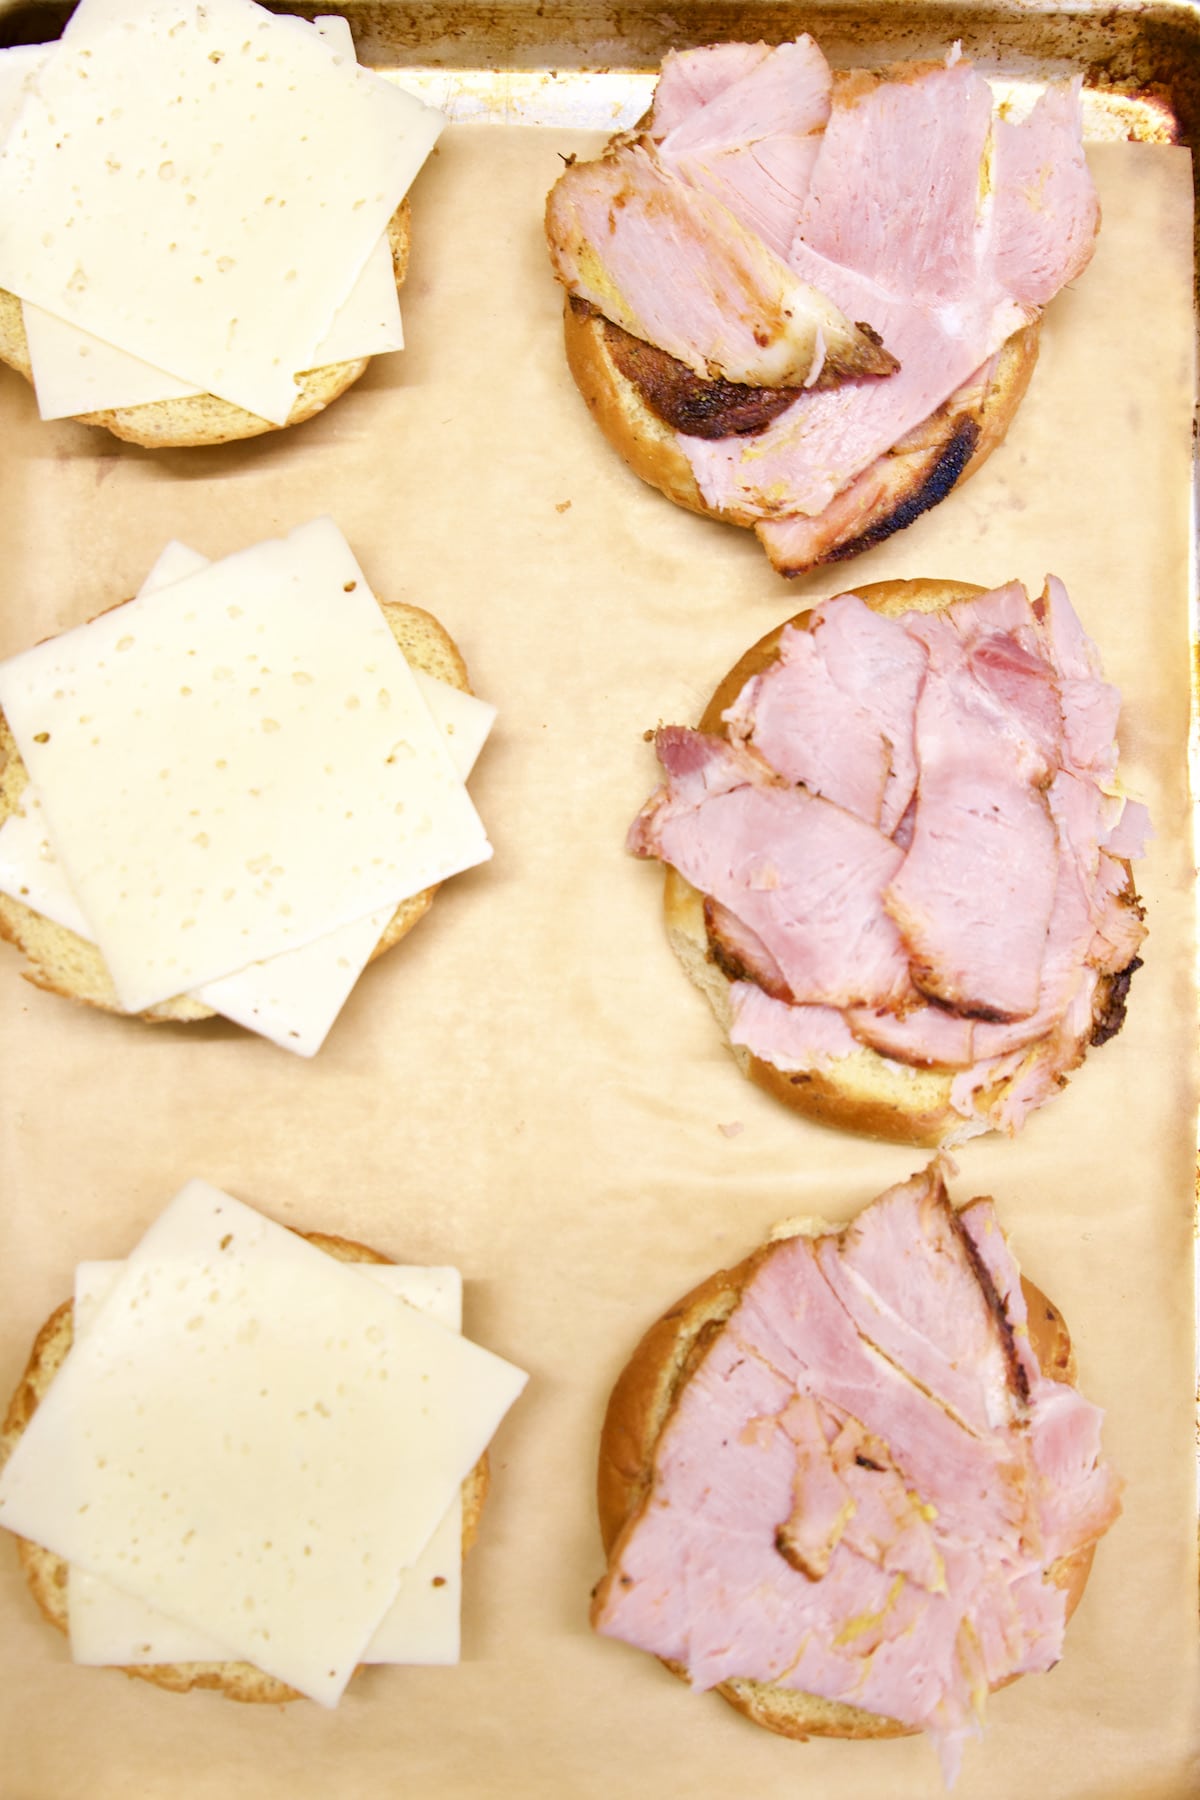 Ham and cheese on buns open faced to toast.